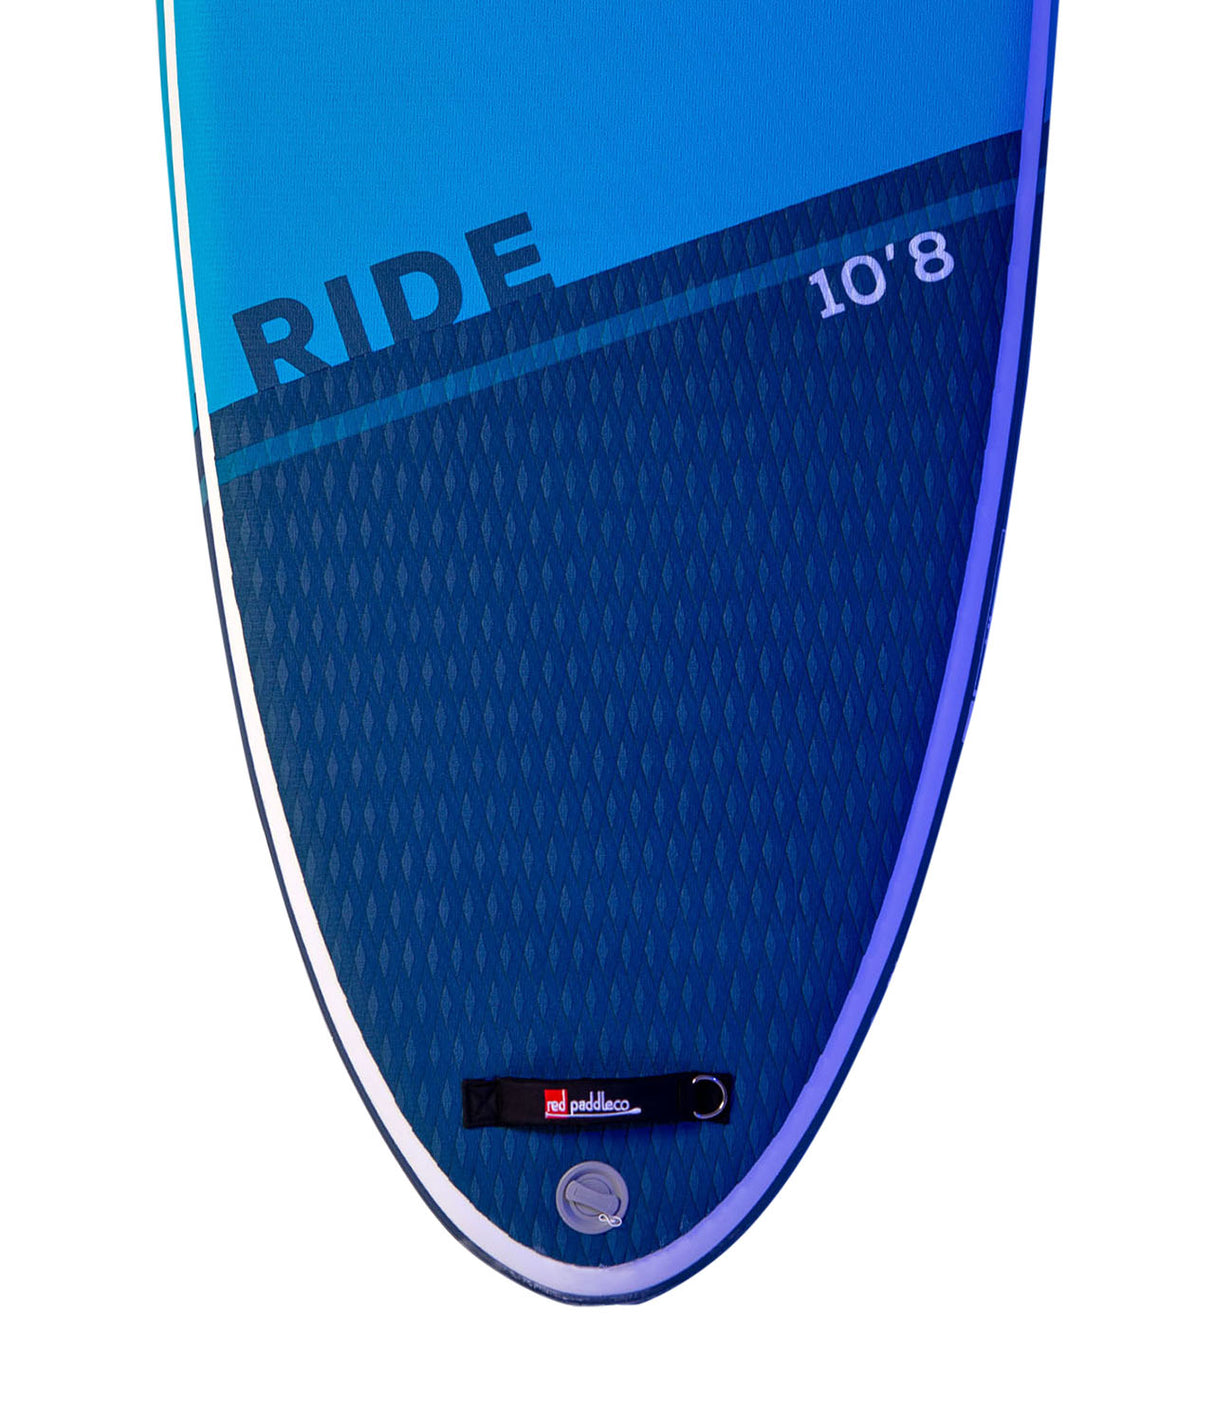 red paddle 10.8 ride staart